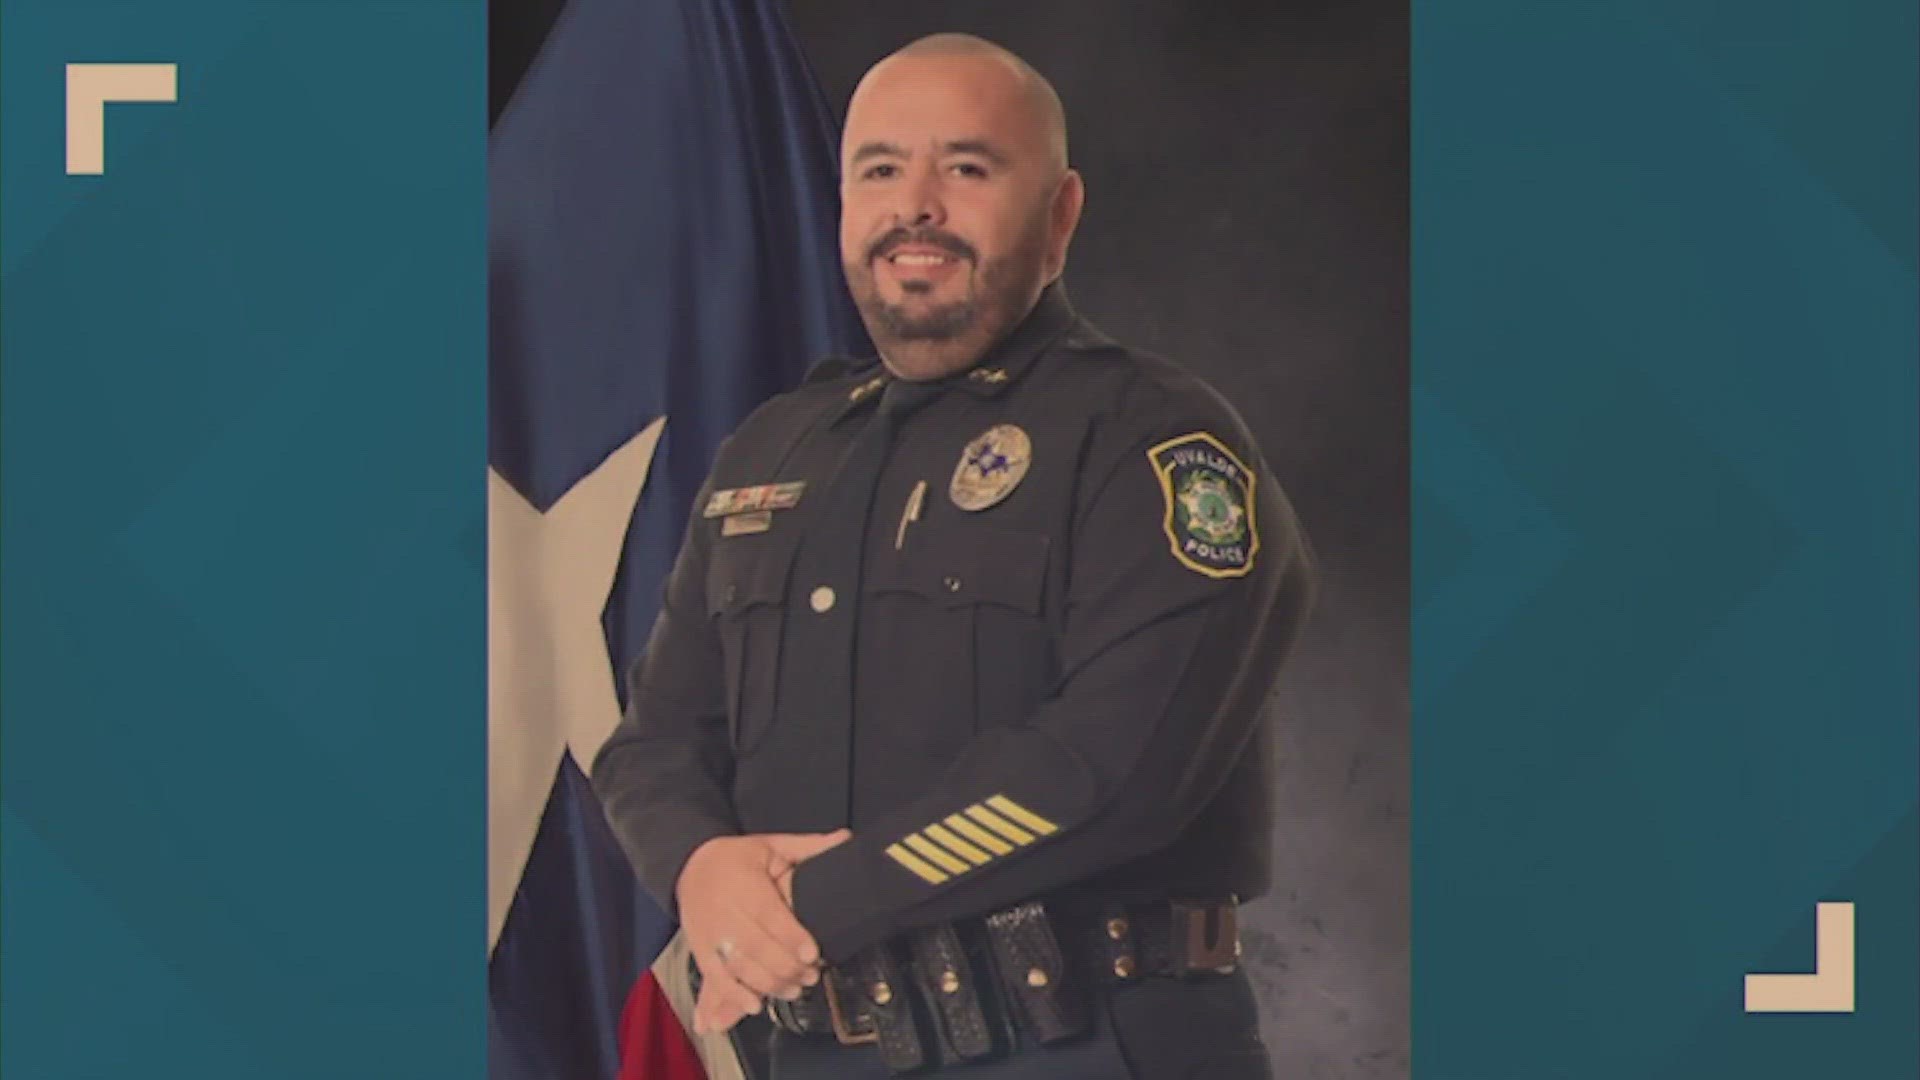 'Too little too late' | Uvalde families respond to police chief resigning before council meeting